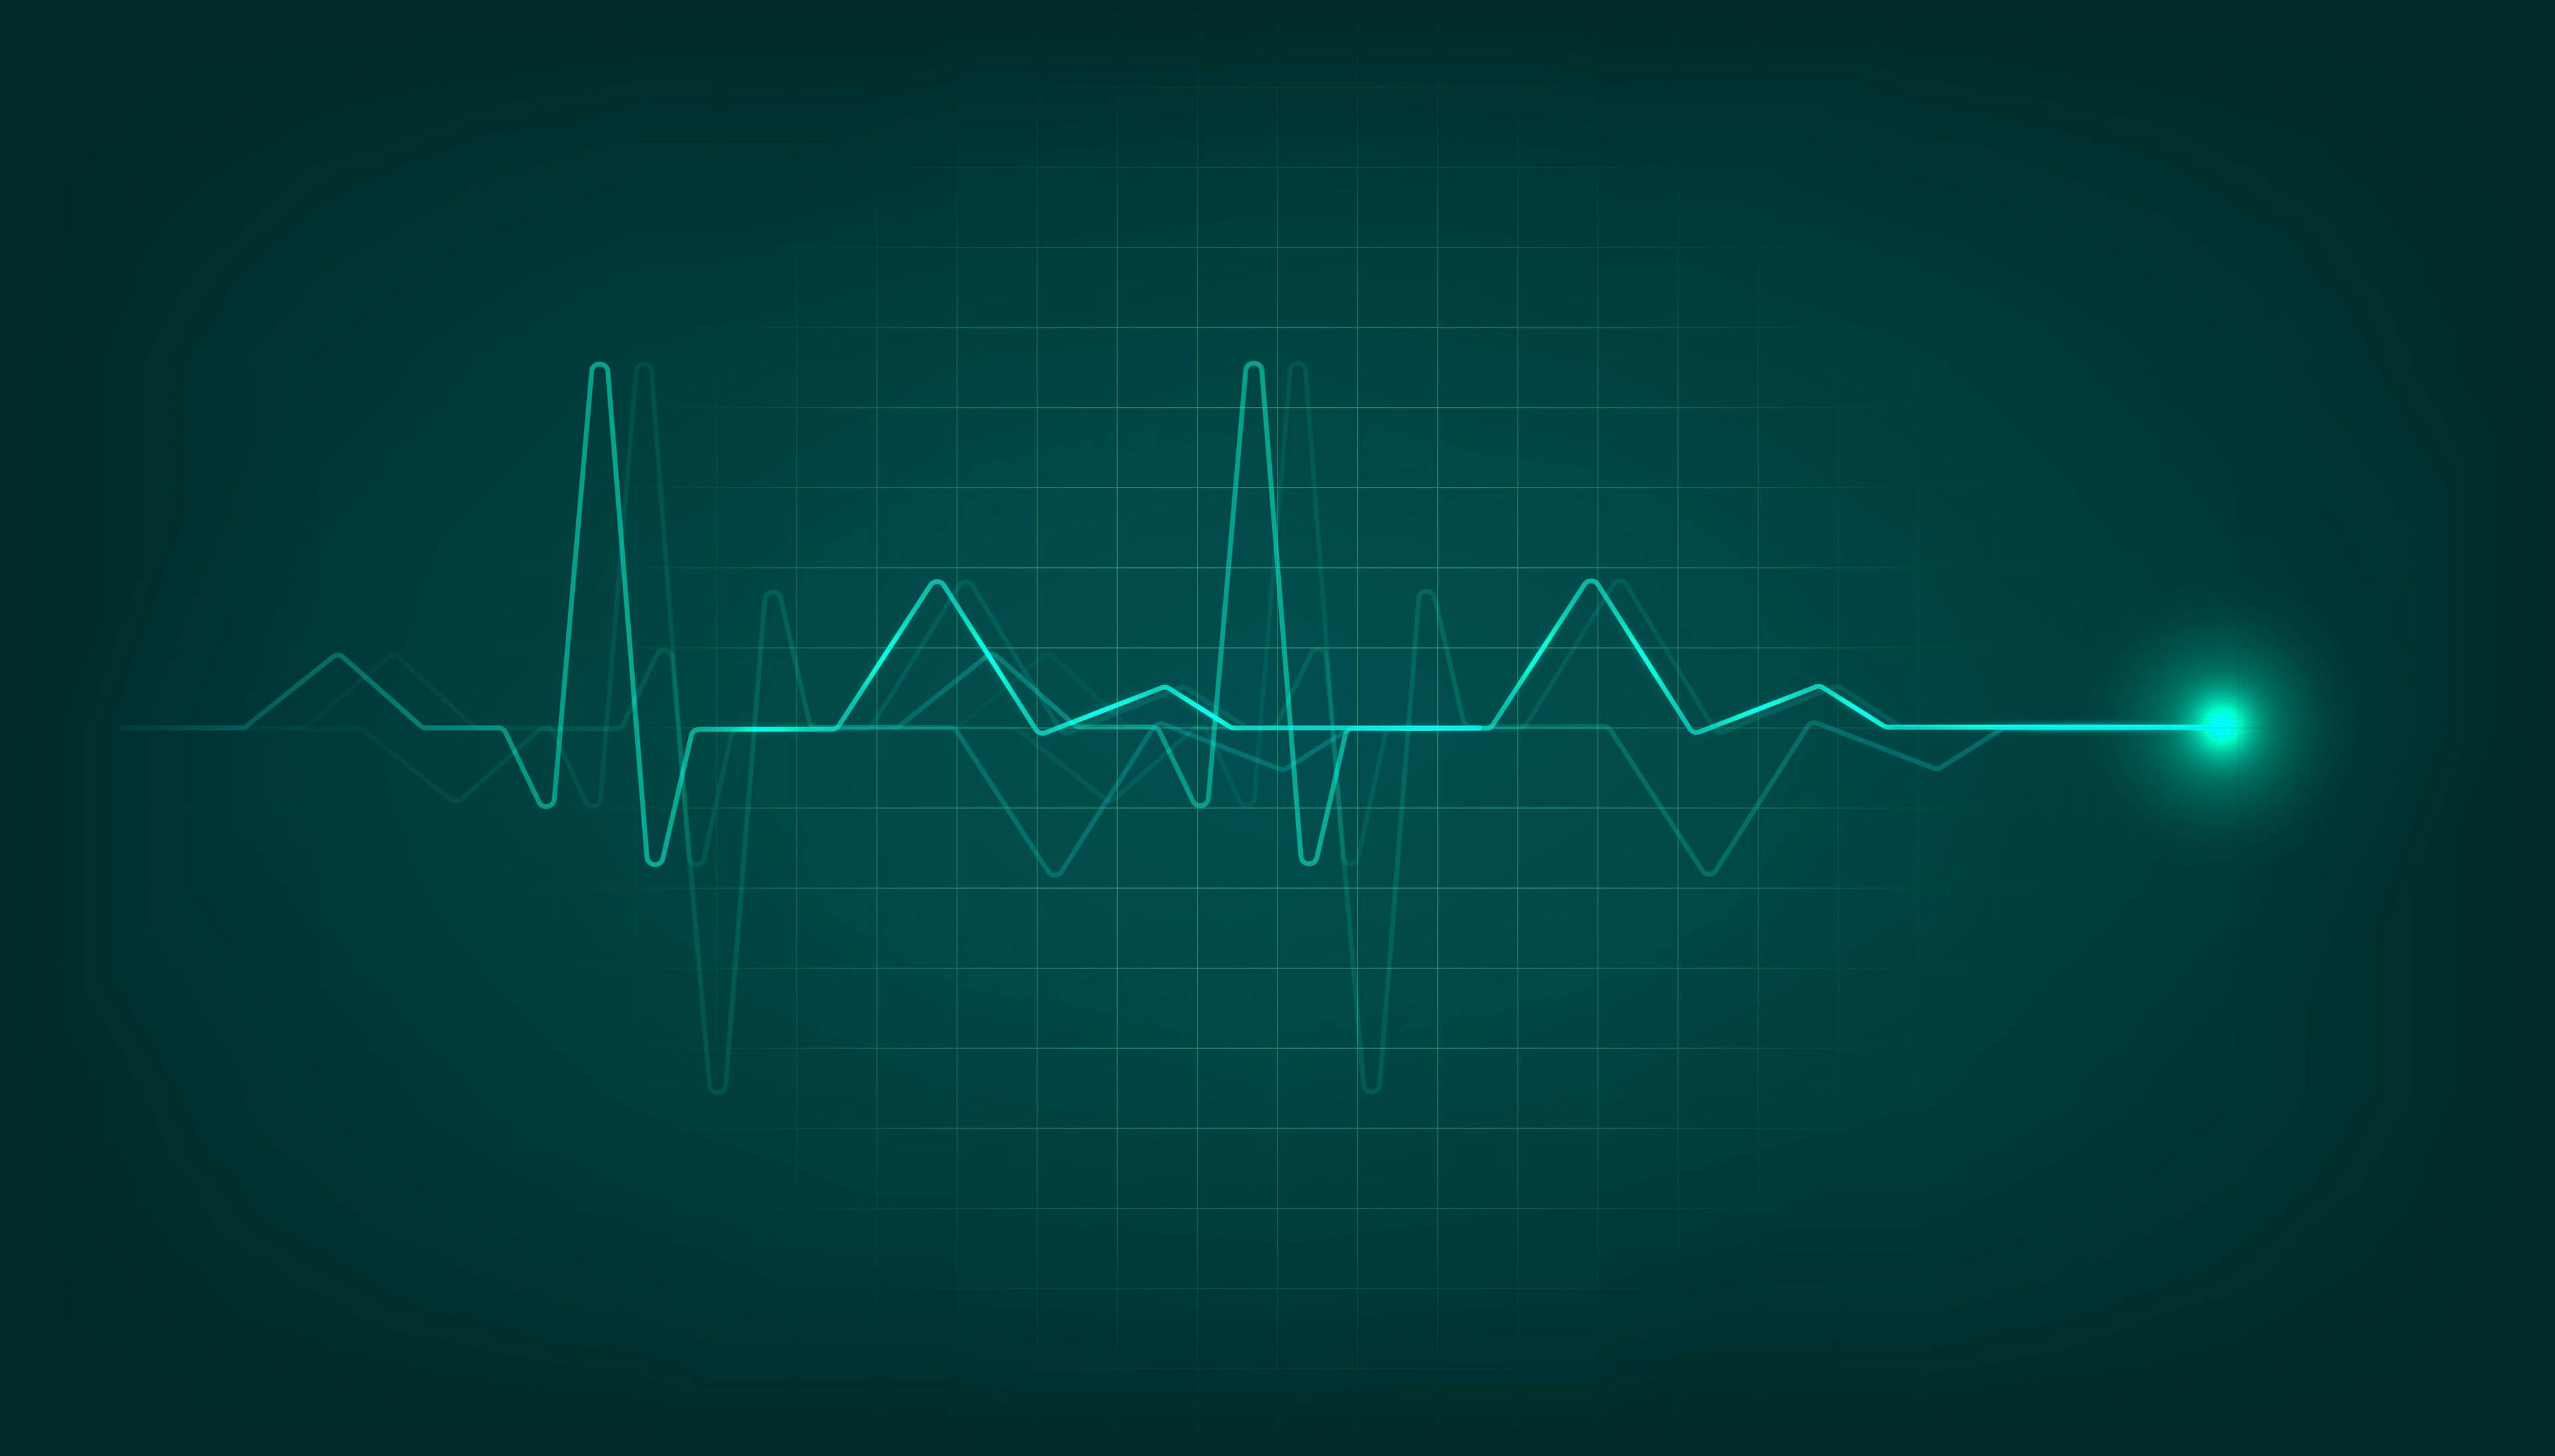 Training an AI model to identify LVSD from single-lead ECG data would allow more reliable, earlier diagnosis, researchers say. (Image credit: @Windawake - stock.adobe.com)